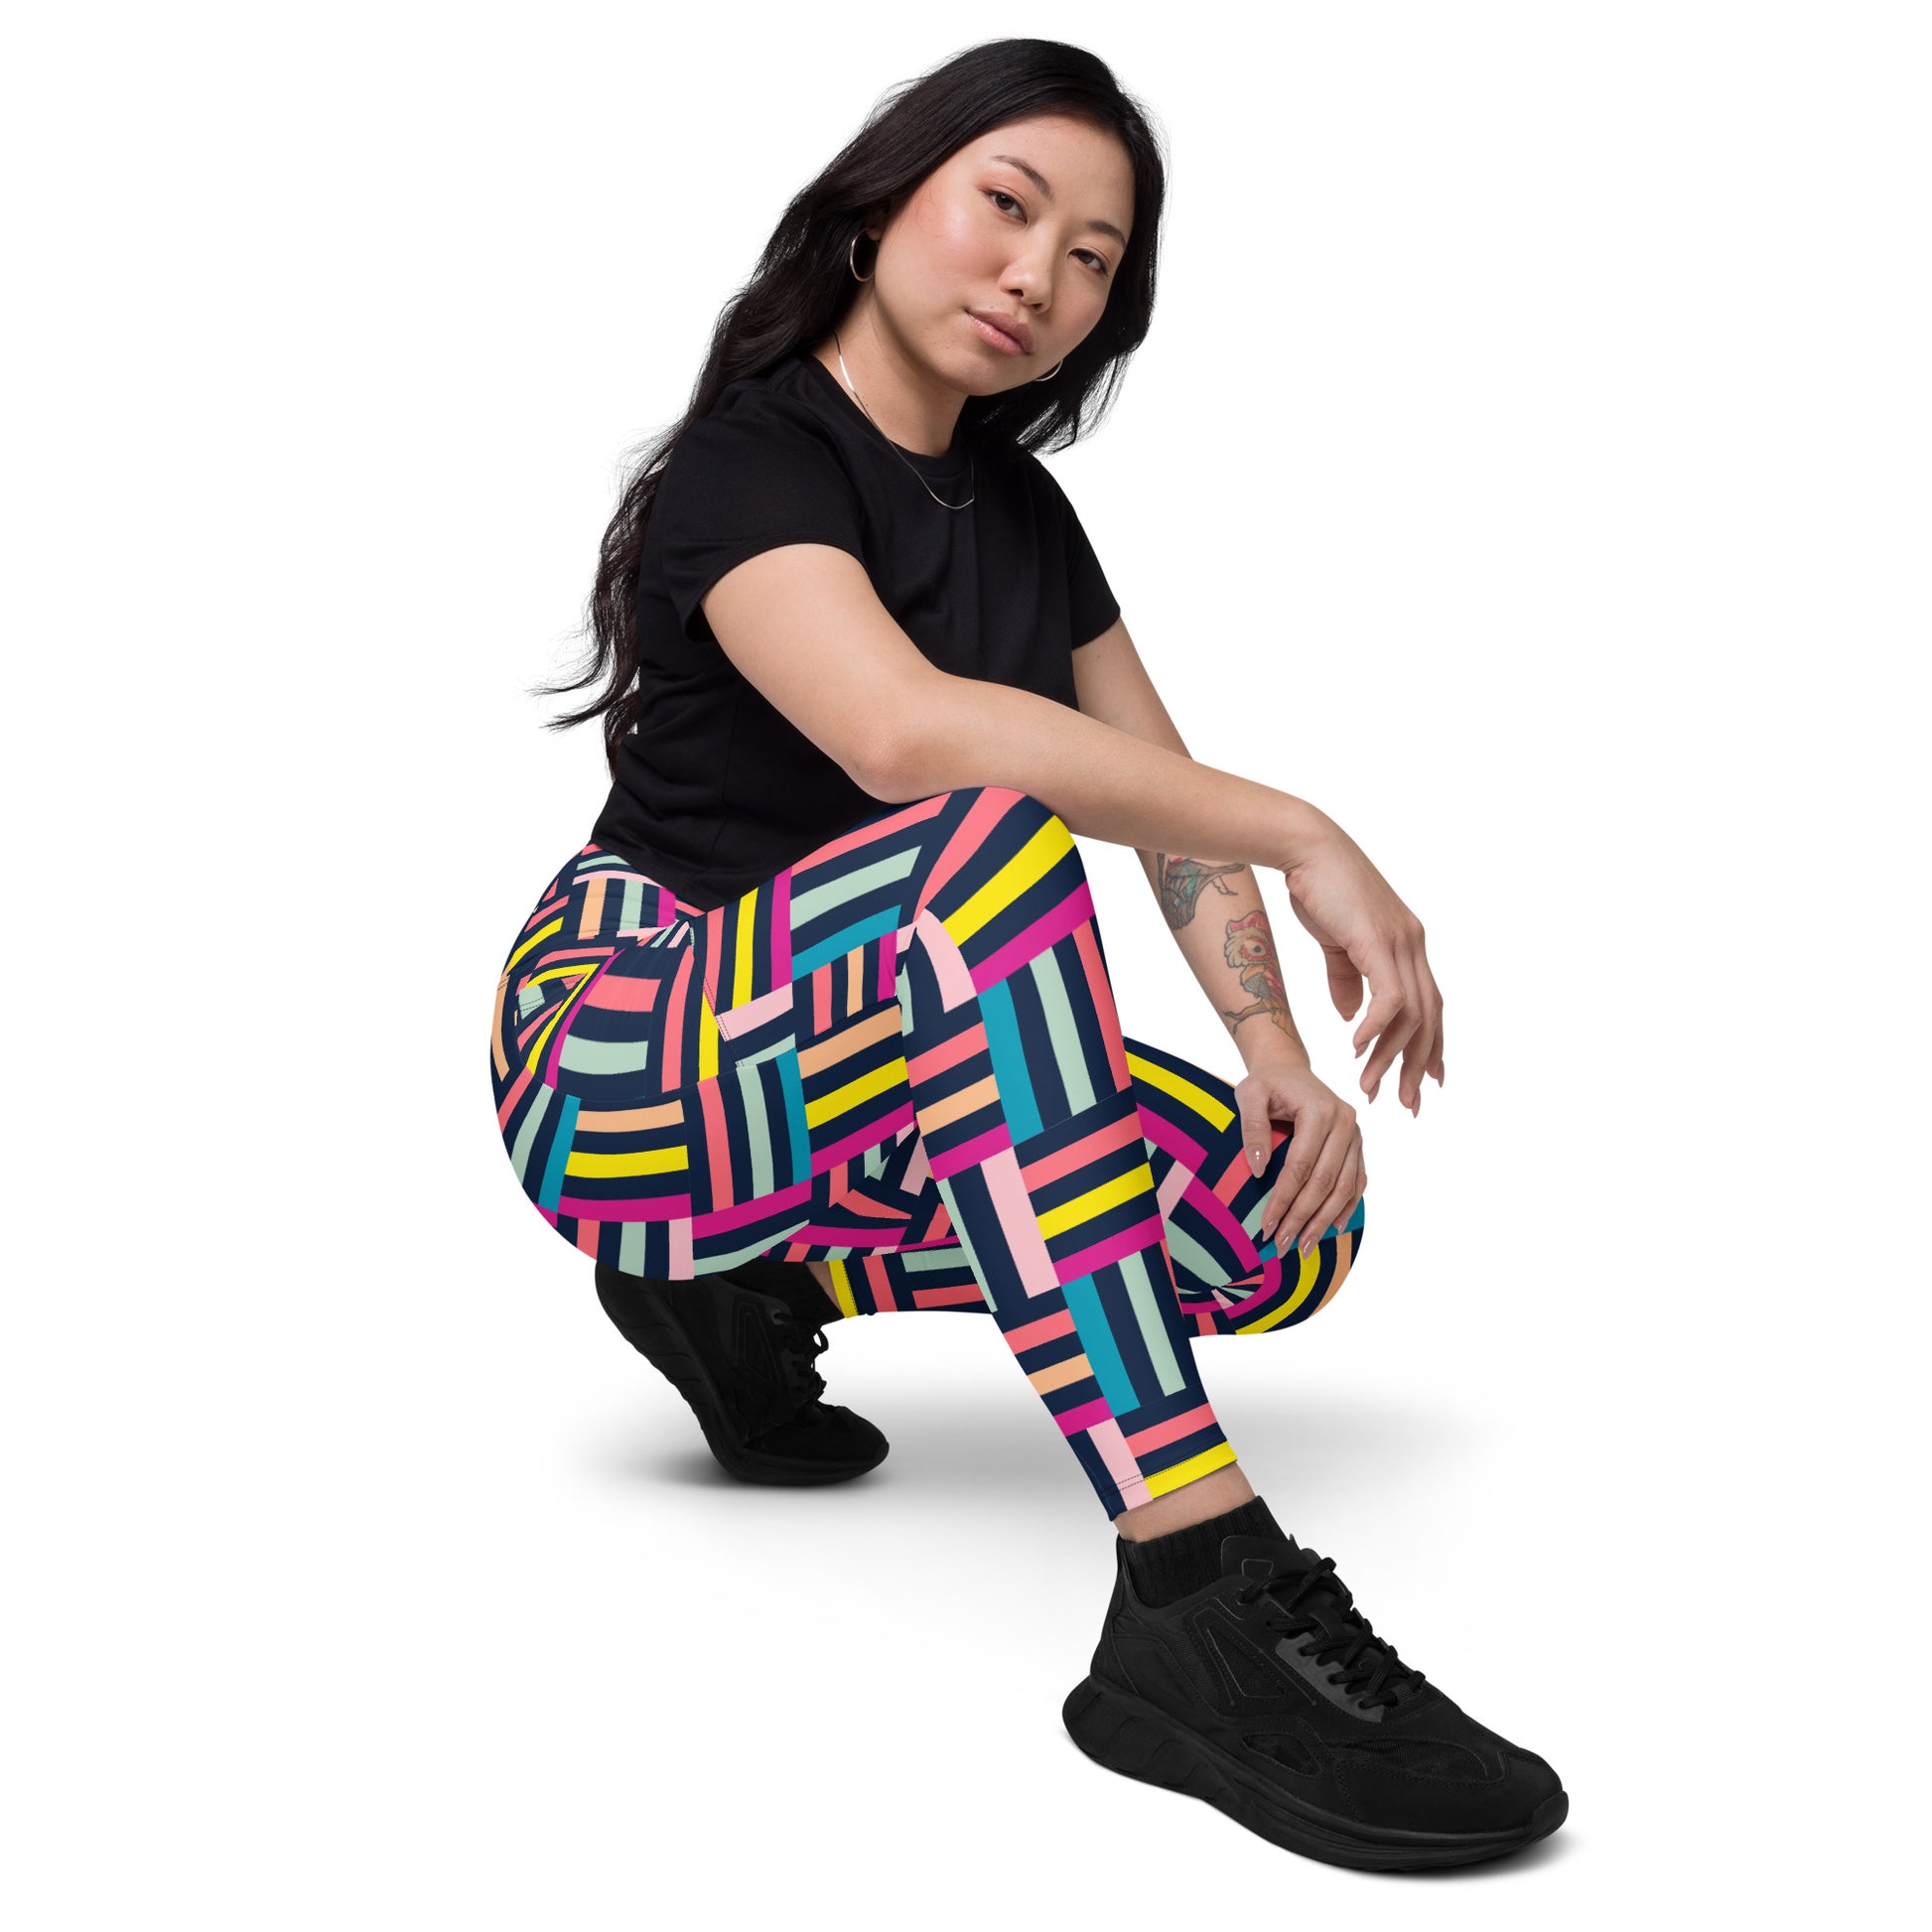 Allsorts - Leggings with pockets, 2XS - 6XL Leggings With Pockets 2XS - 6XL (US)